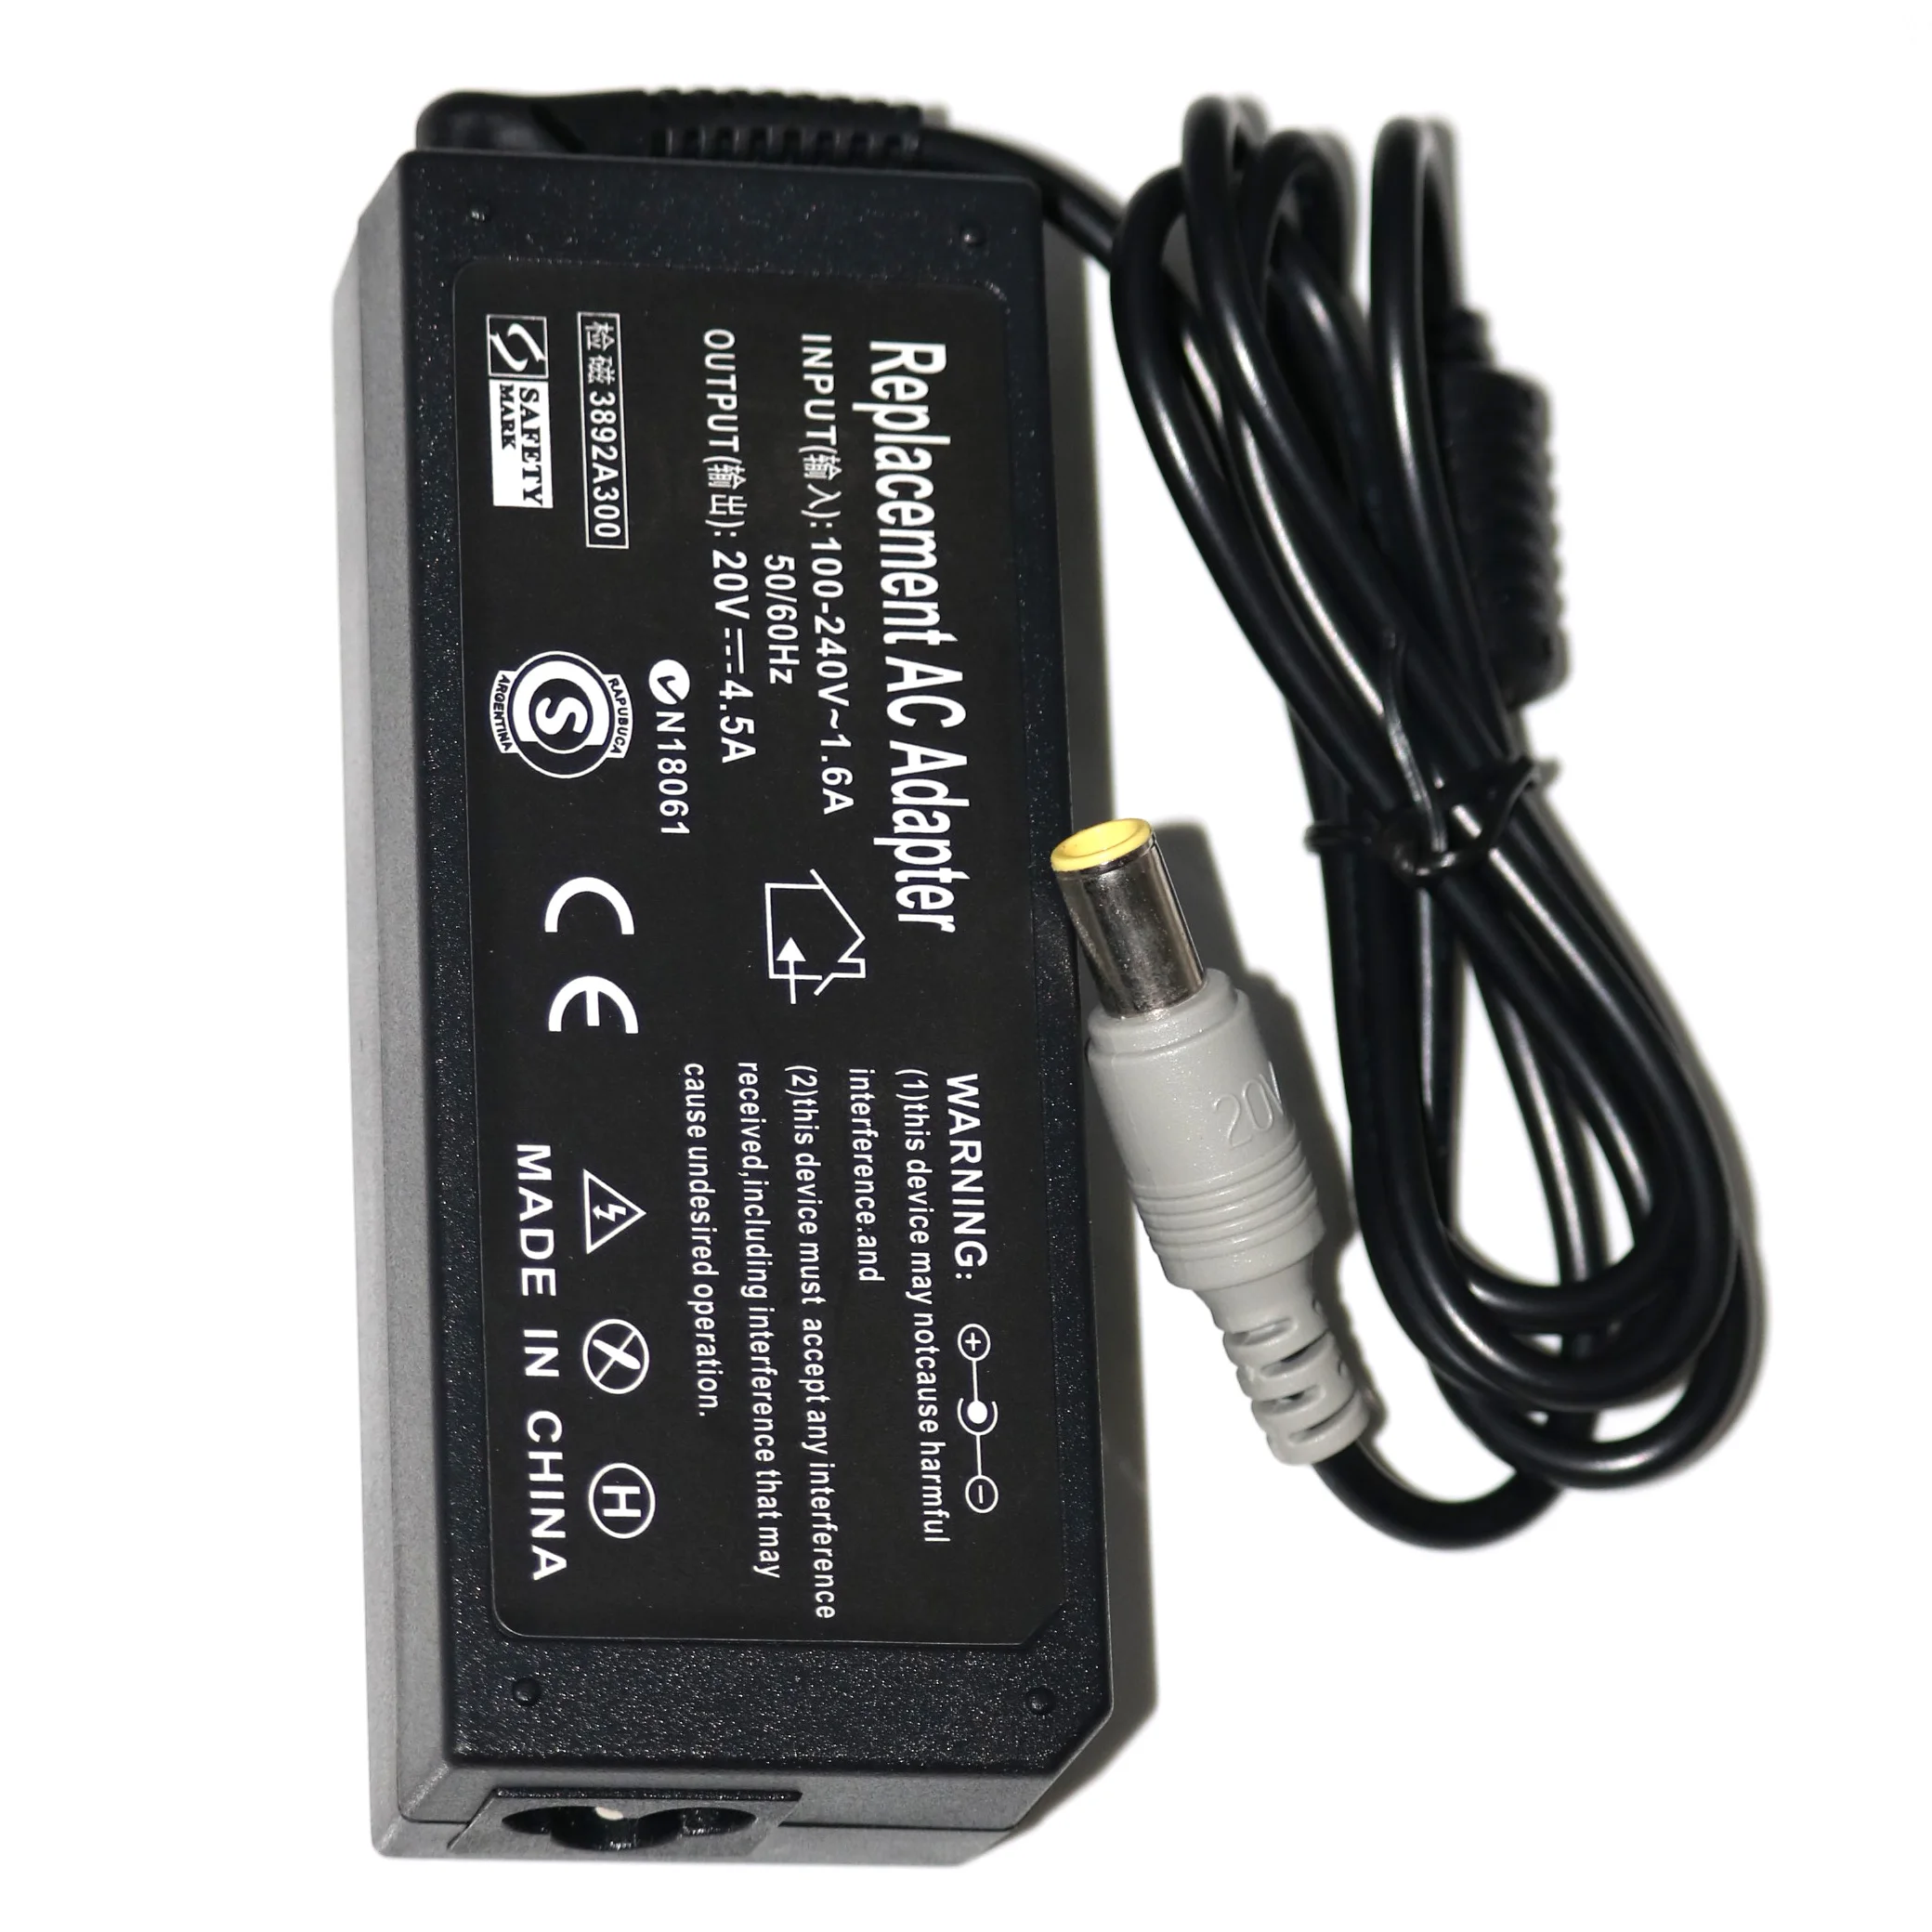 

20V 4.5A 90W Replacement AC Power Adapter Charger For Lenovo Thinkpad E420 E430 T61 T60p Z60T T R61E SL400 T61 X61 X61 X200 T410